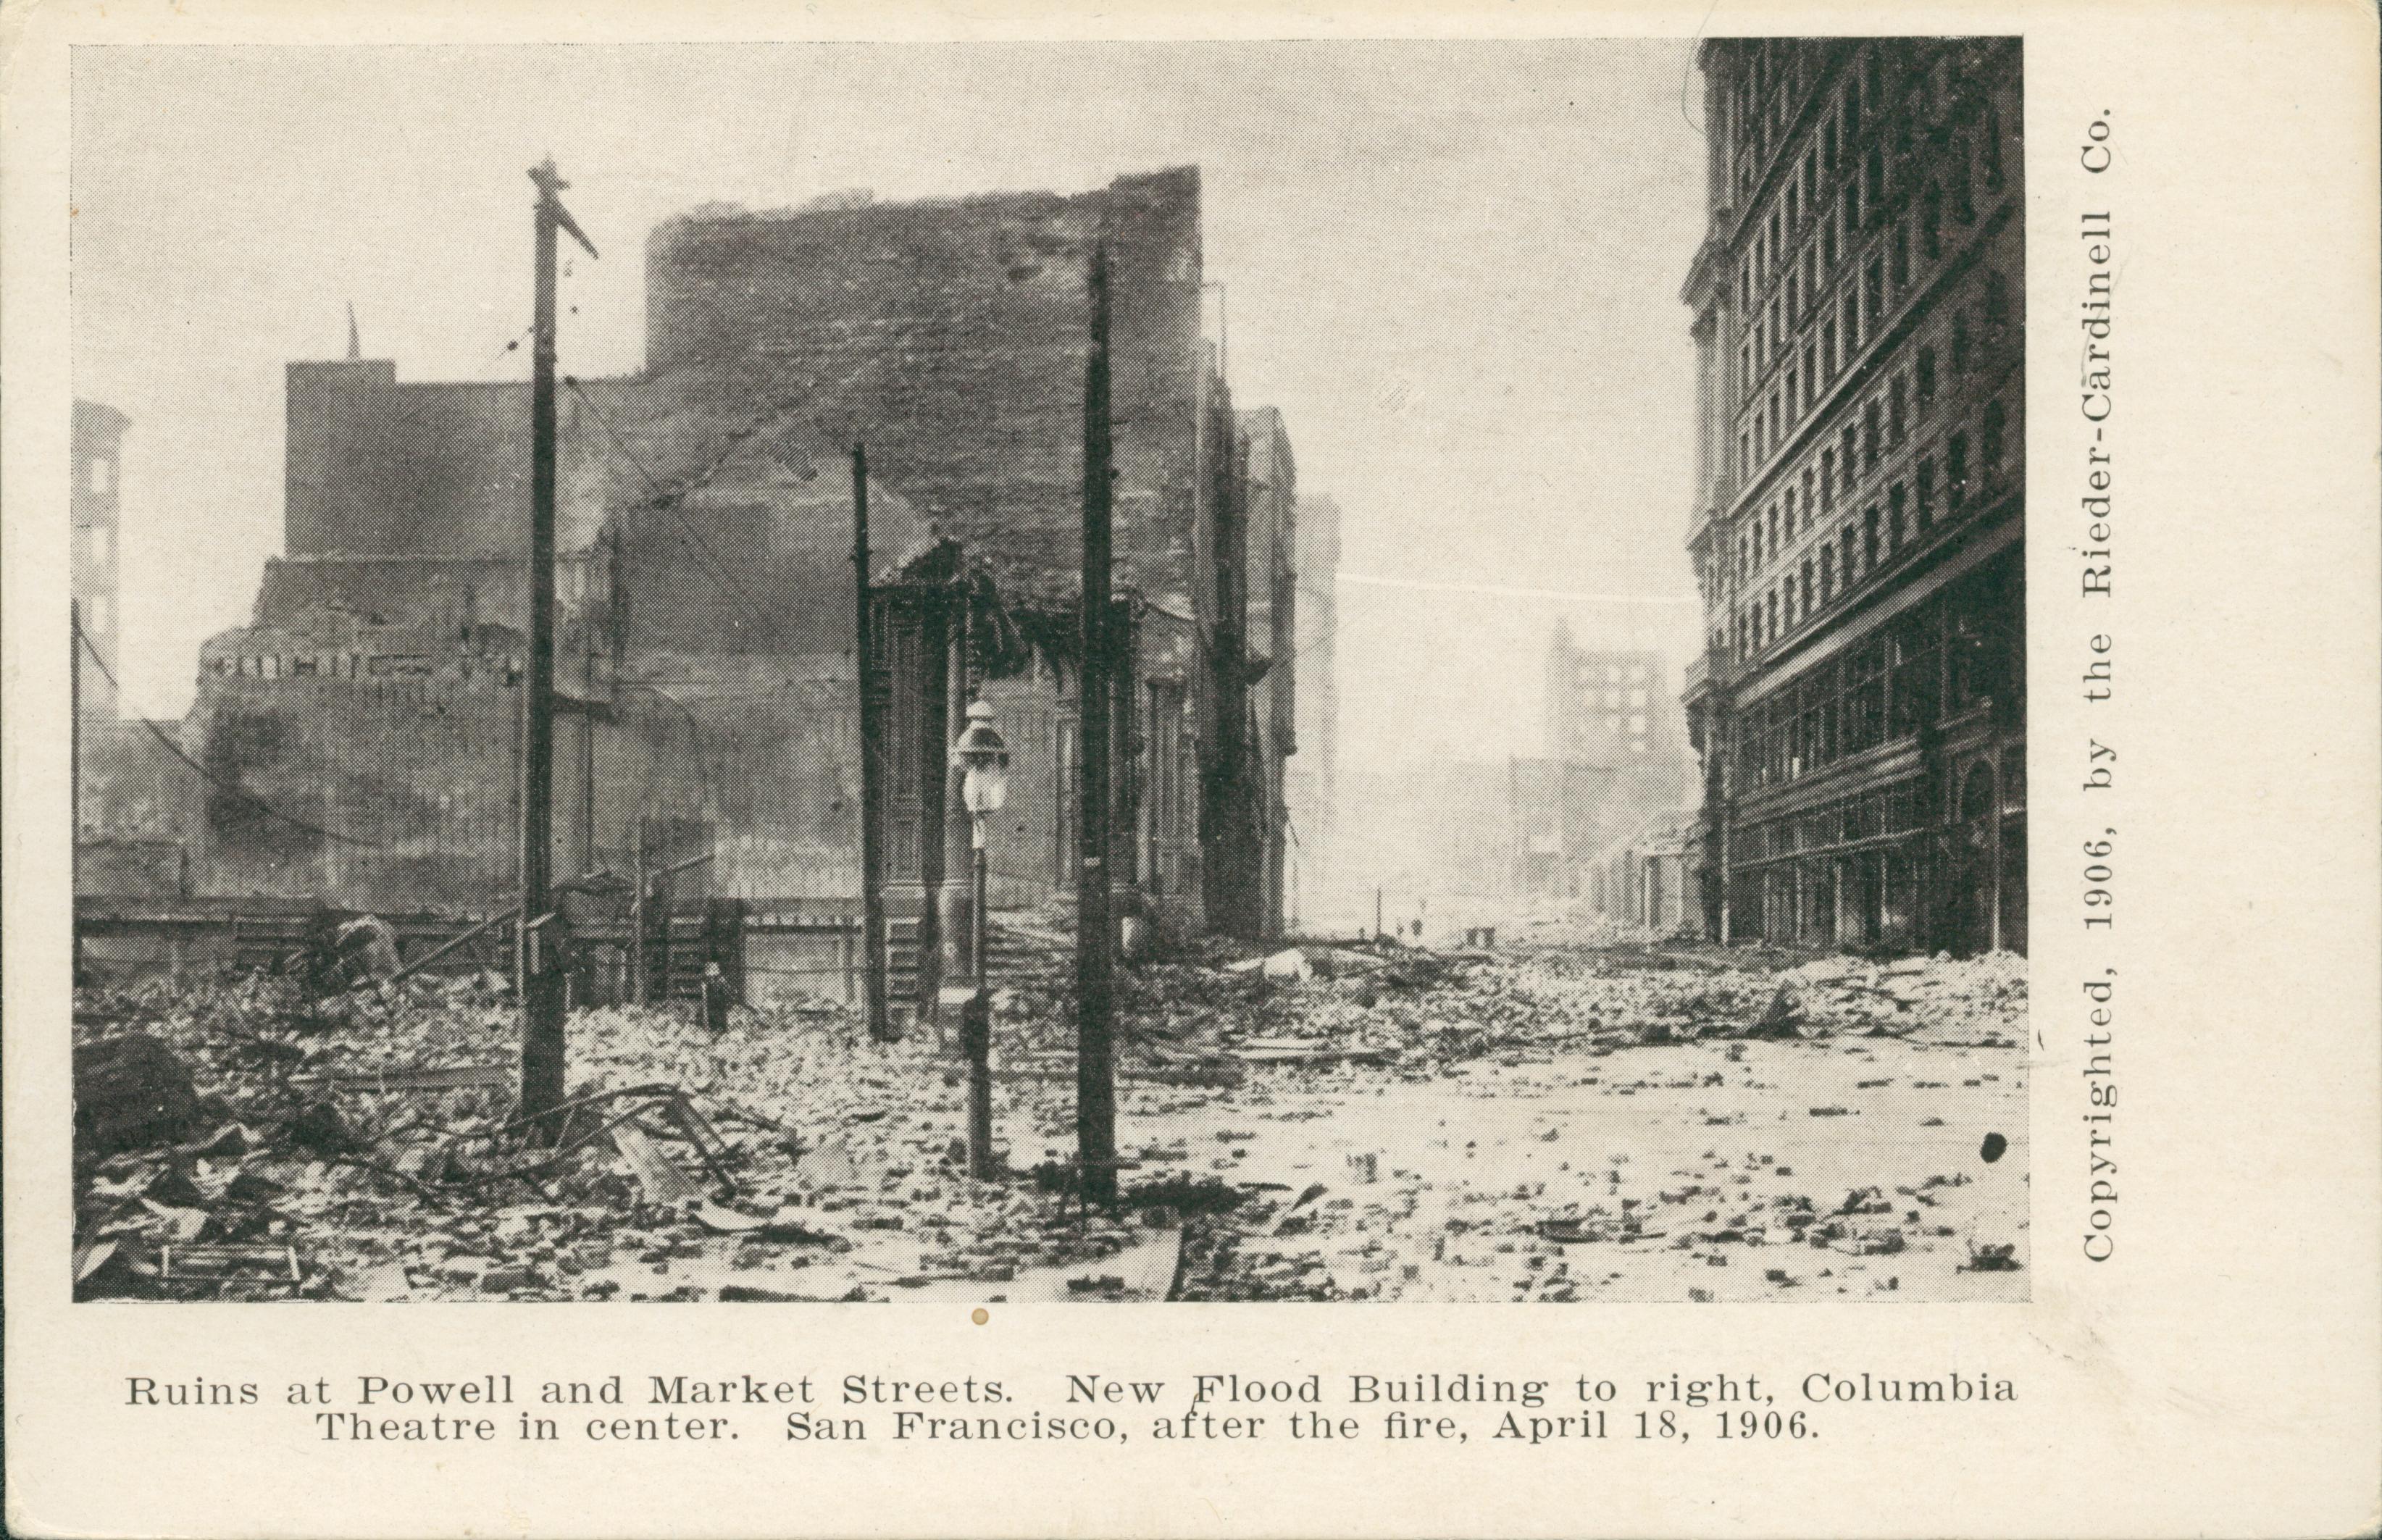 Shows the street covered in rubble with a collapsed building on the left.